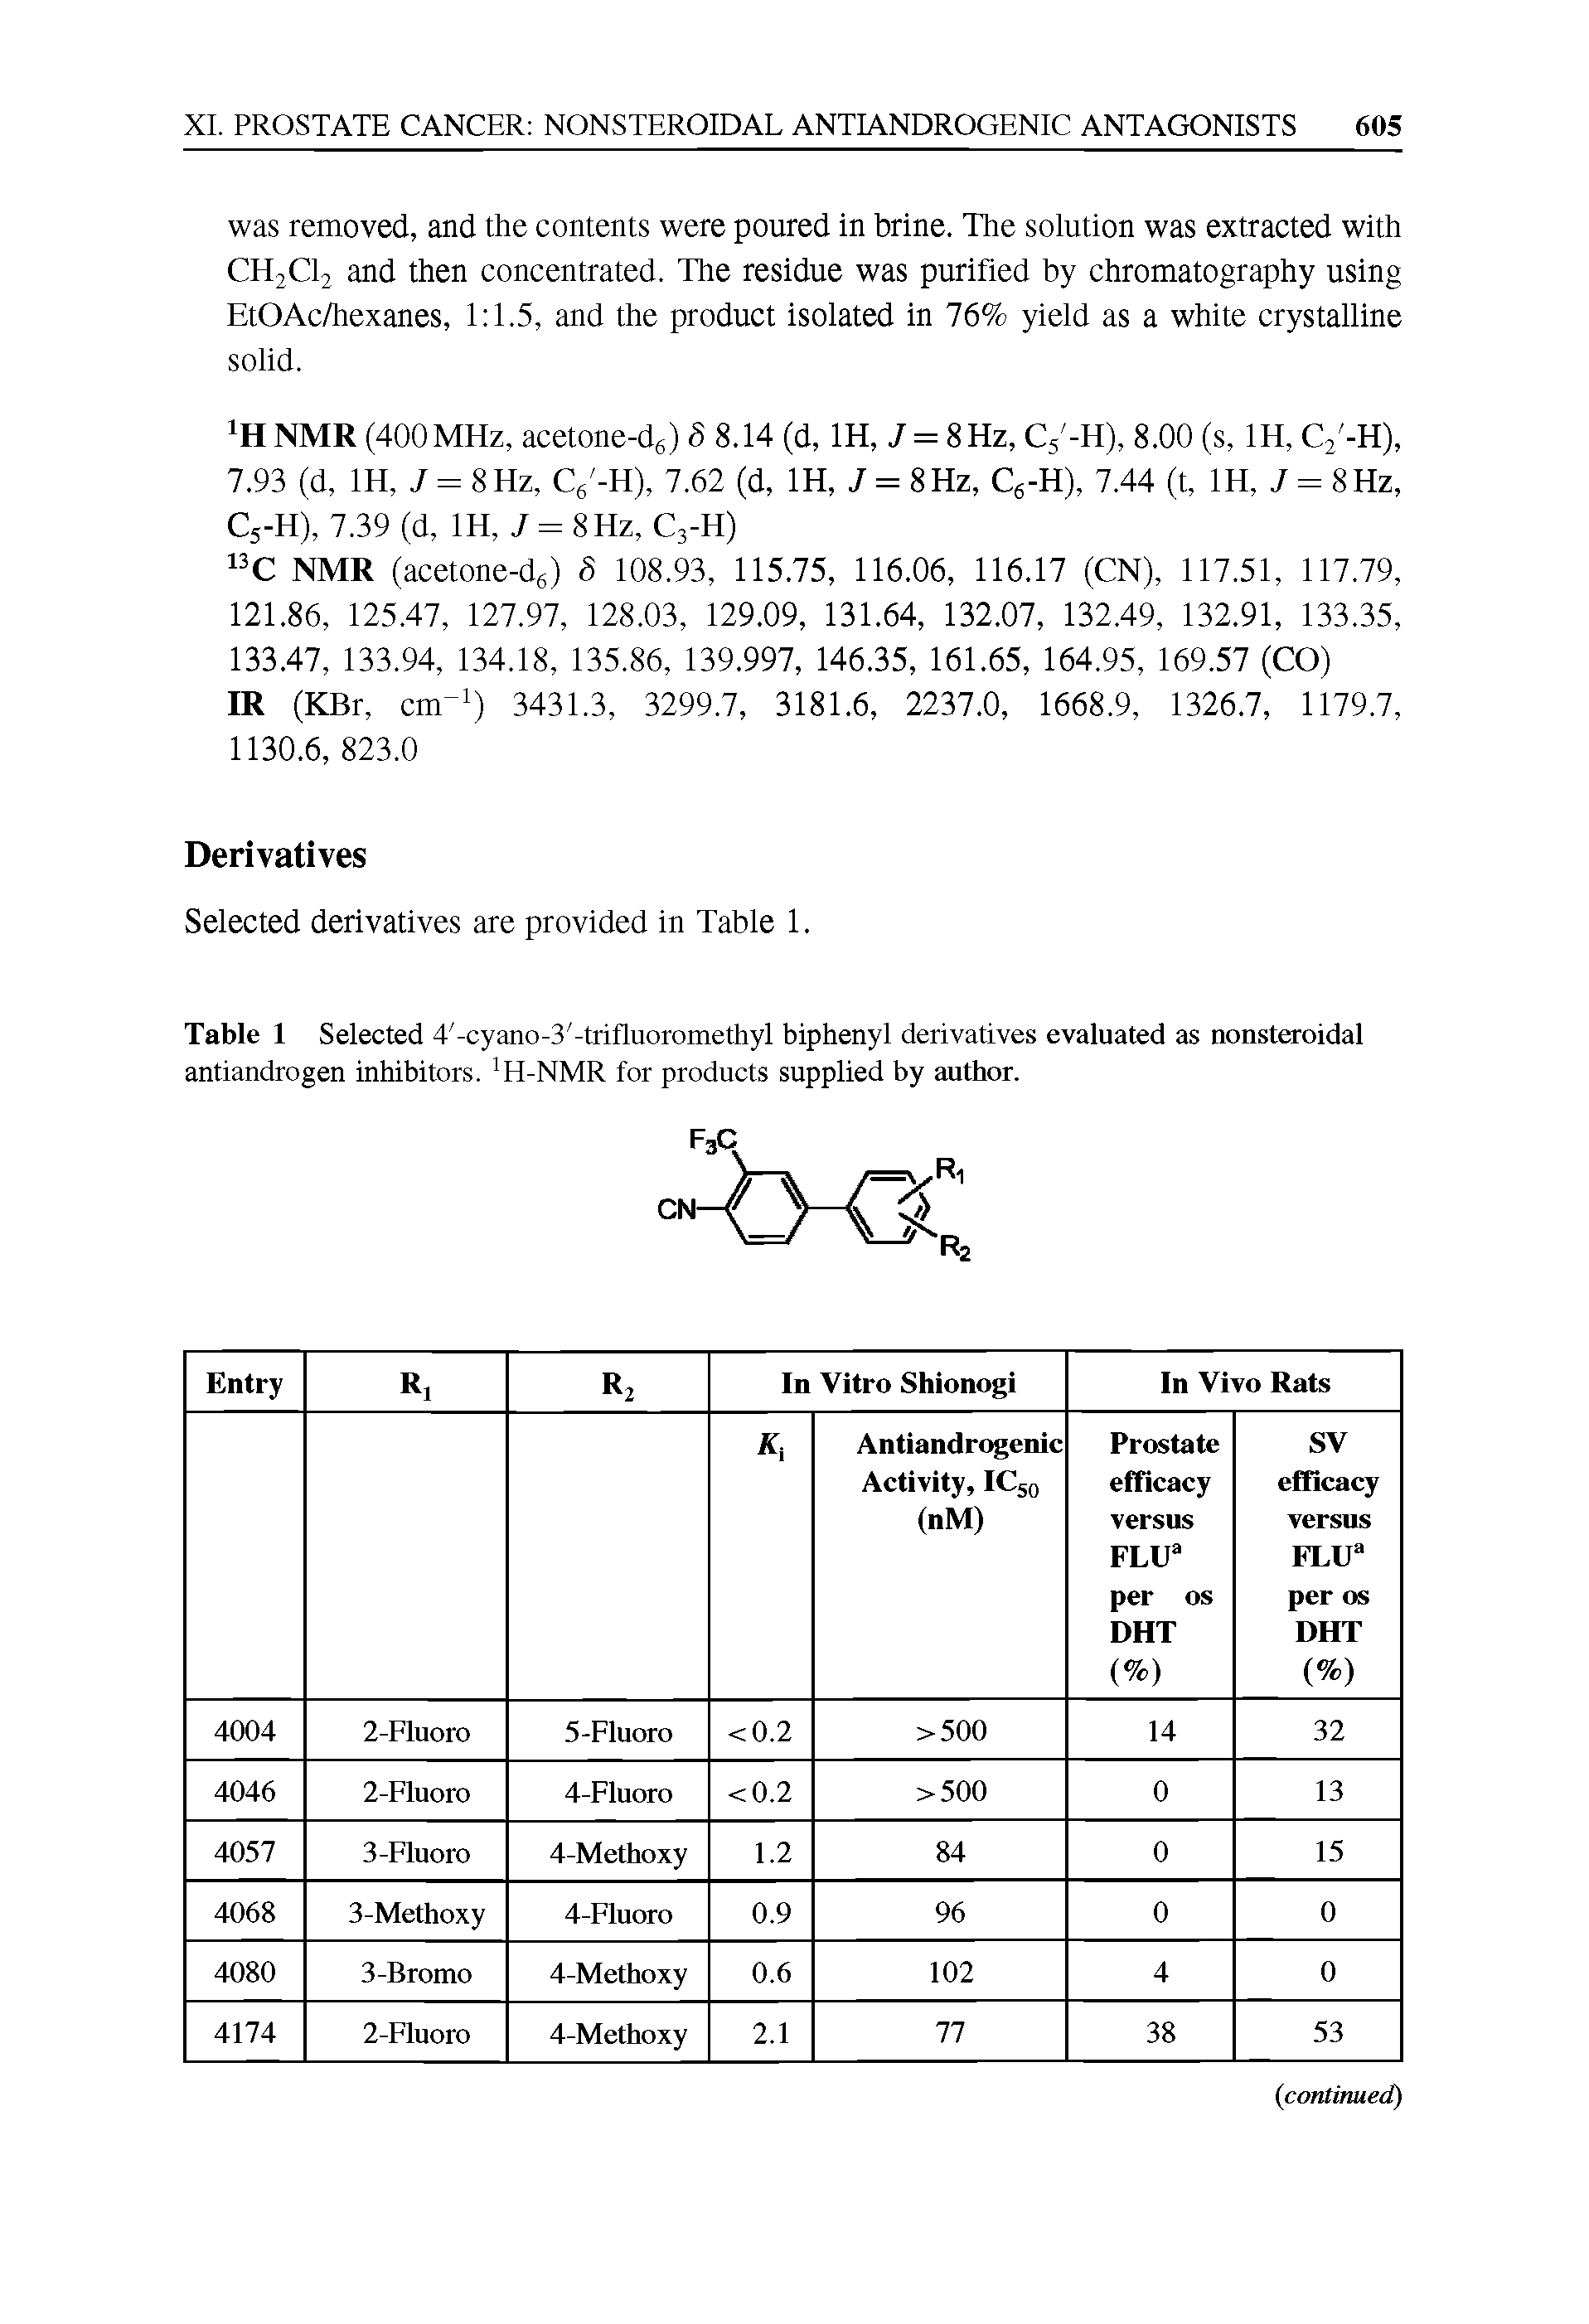 Table 1 Selected 4 -cyano-3 -trifluoromethyl biphenyl derivatives evaluated as nonsteroidal antiandrogen inhibitors. H-NMR for products supplied by author.